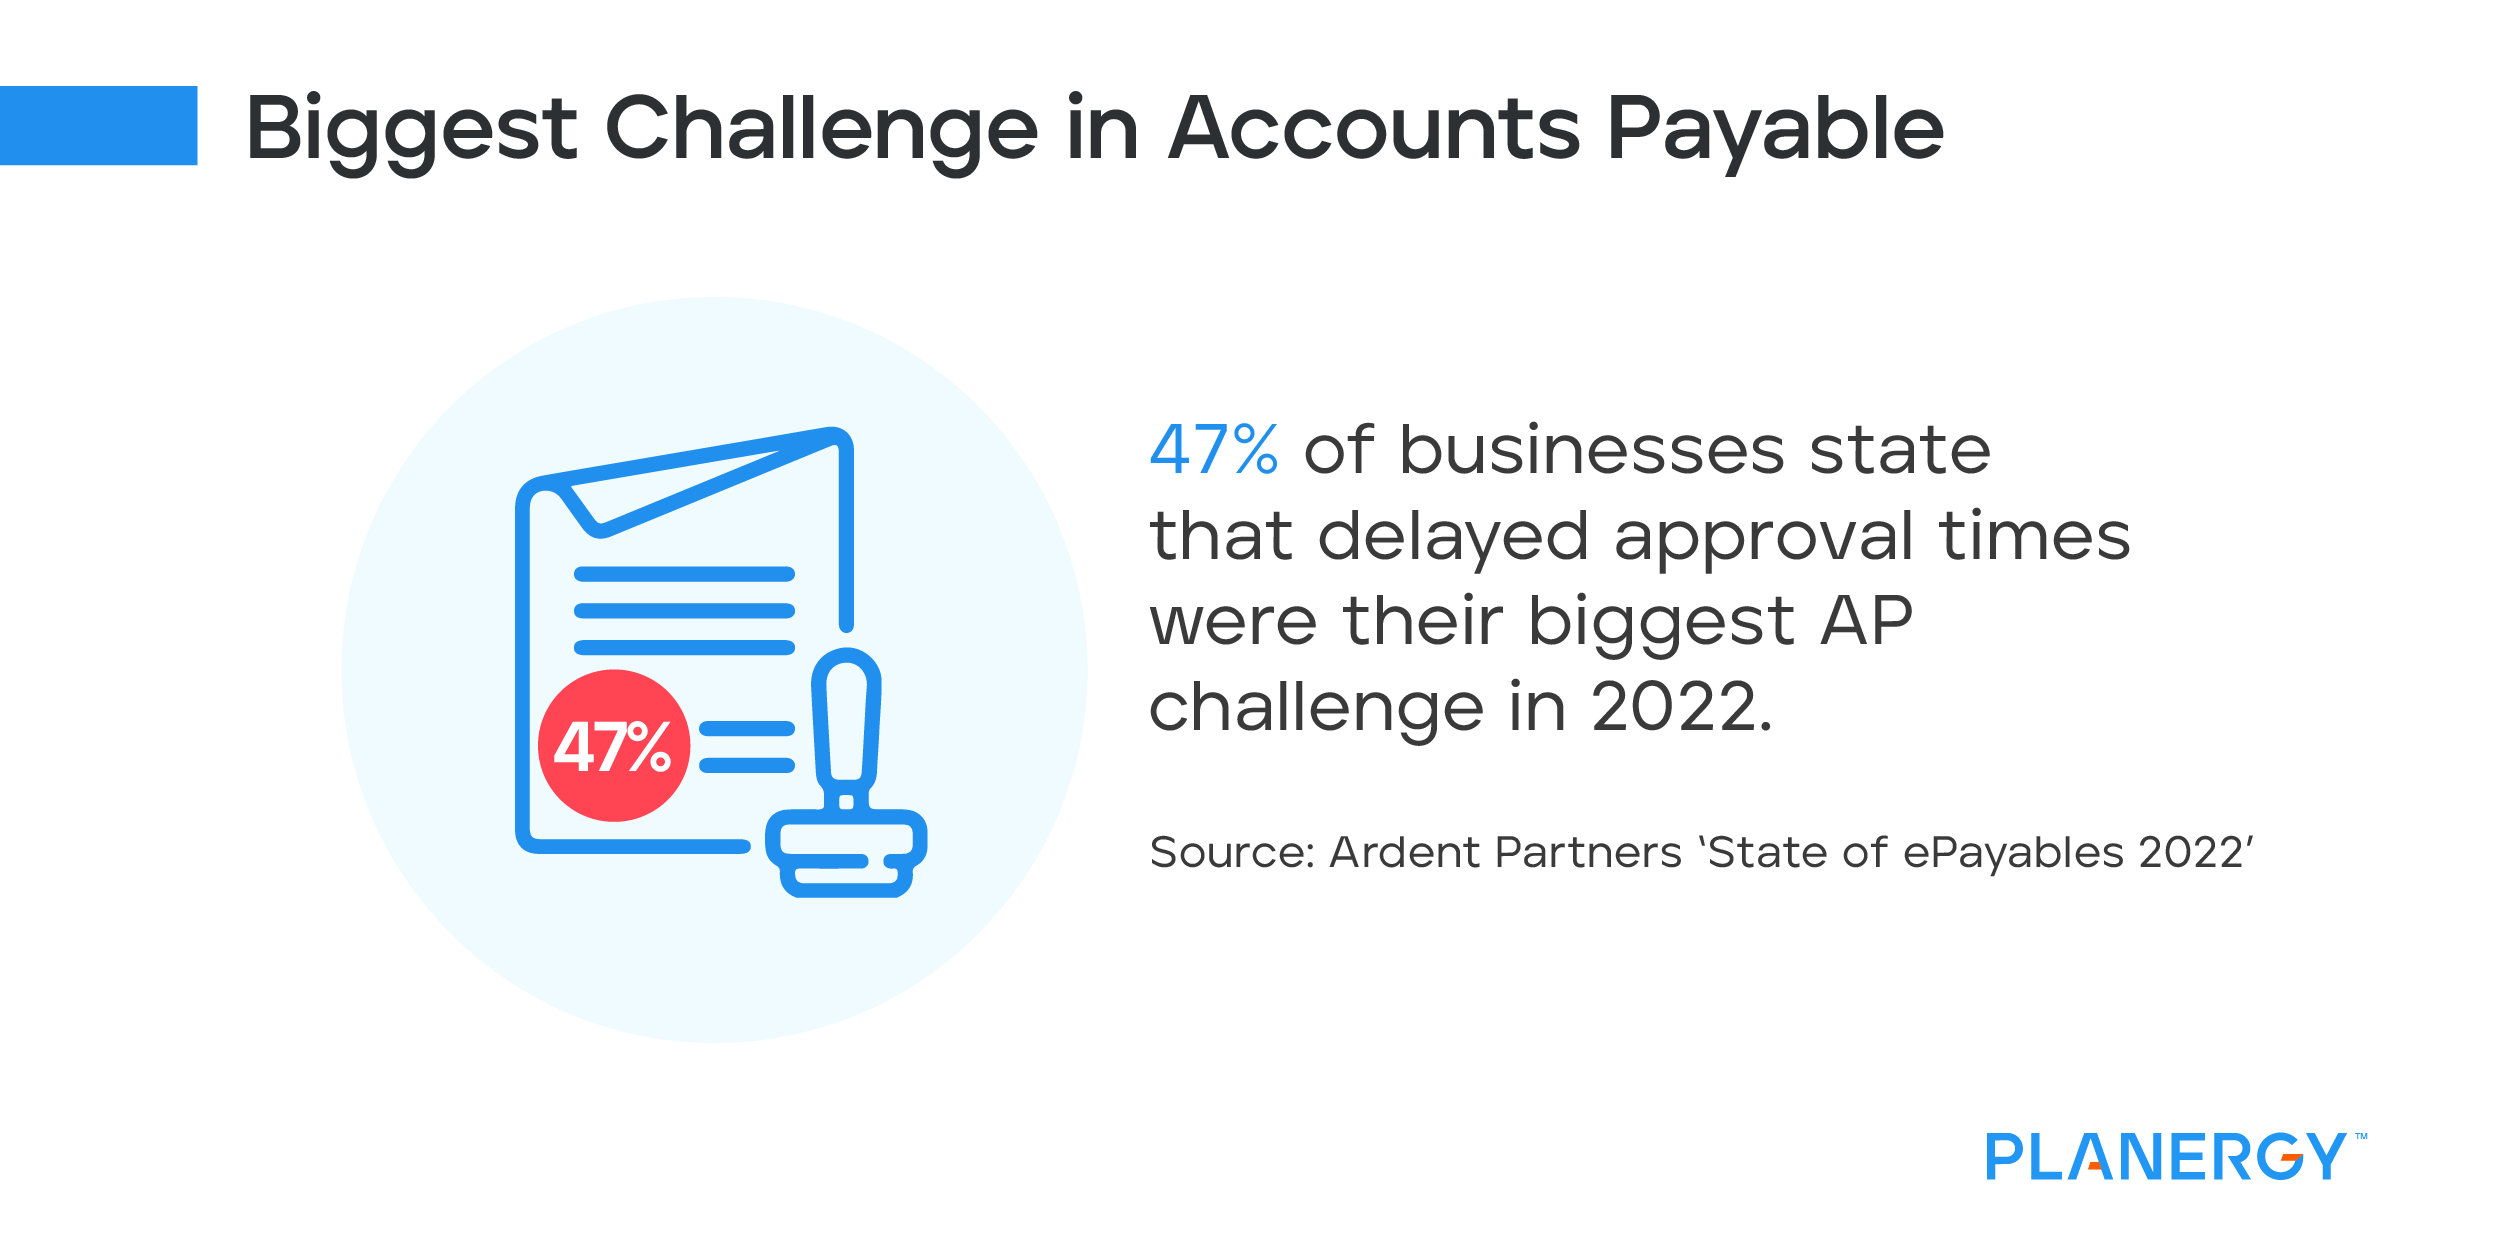 Biggest Challenge in Accounts Payable